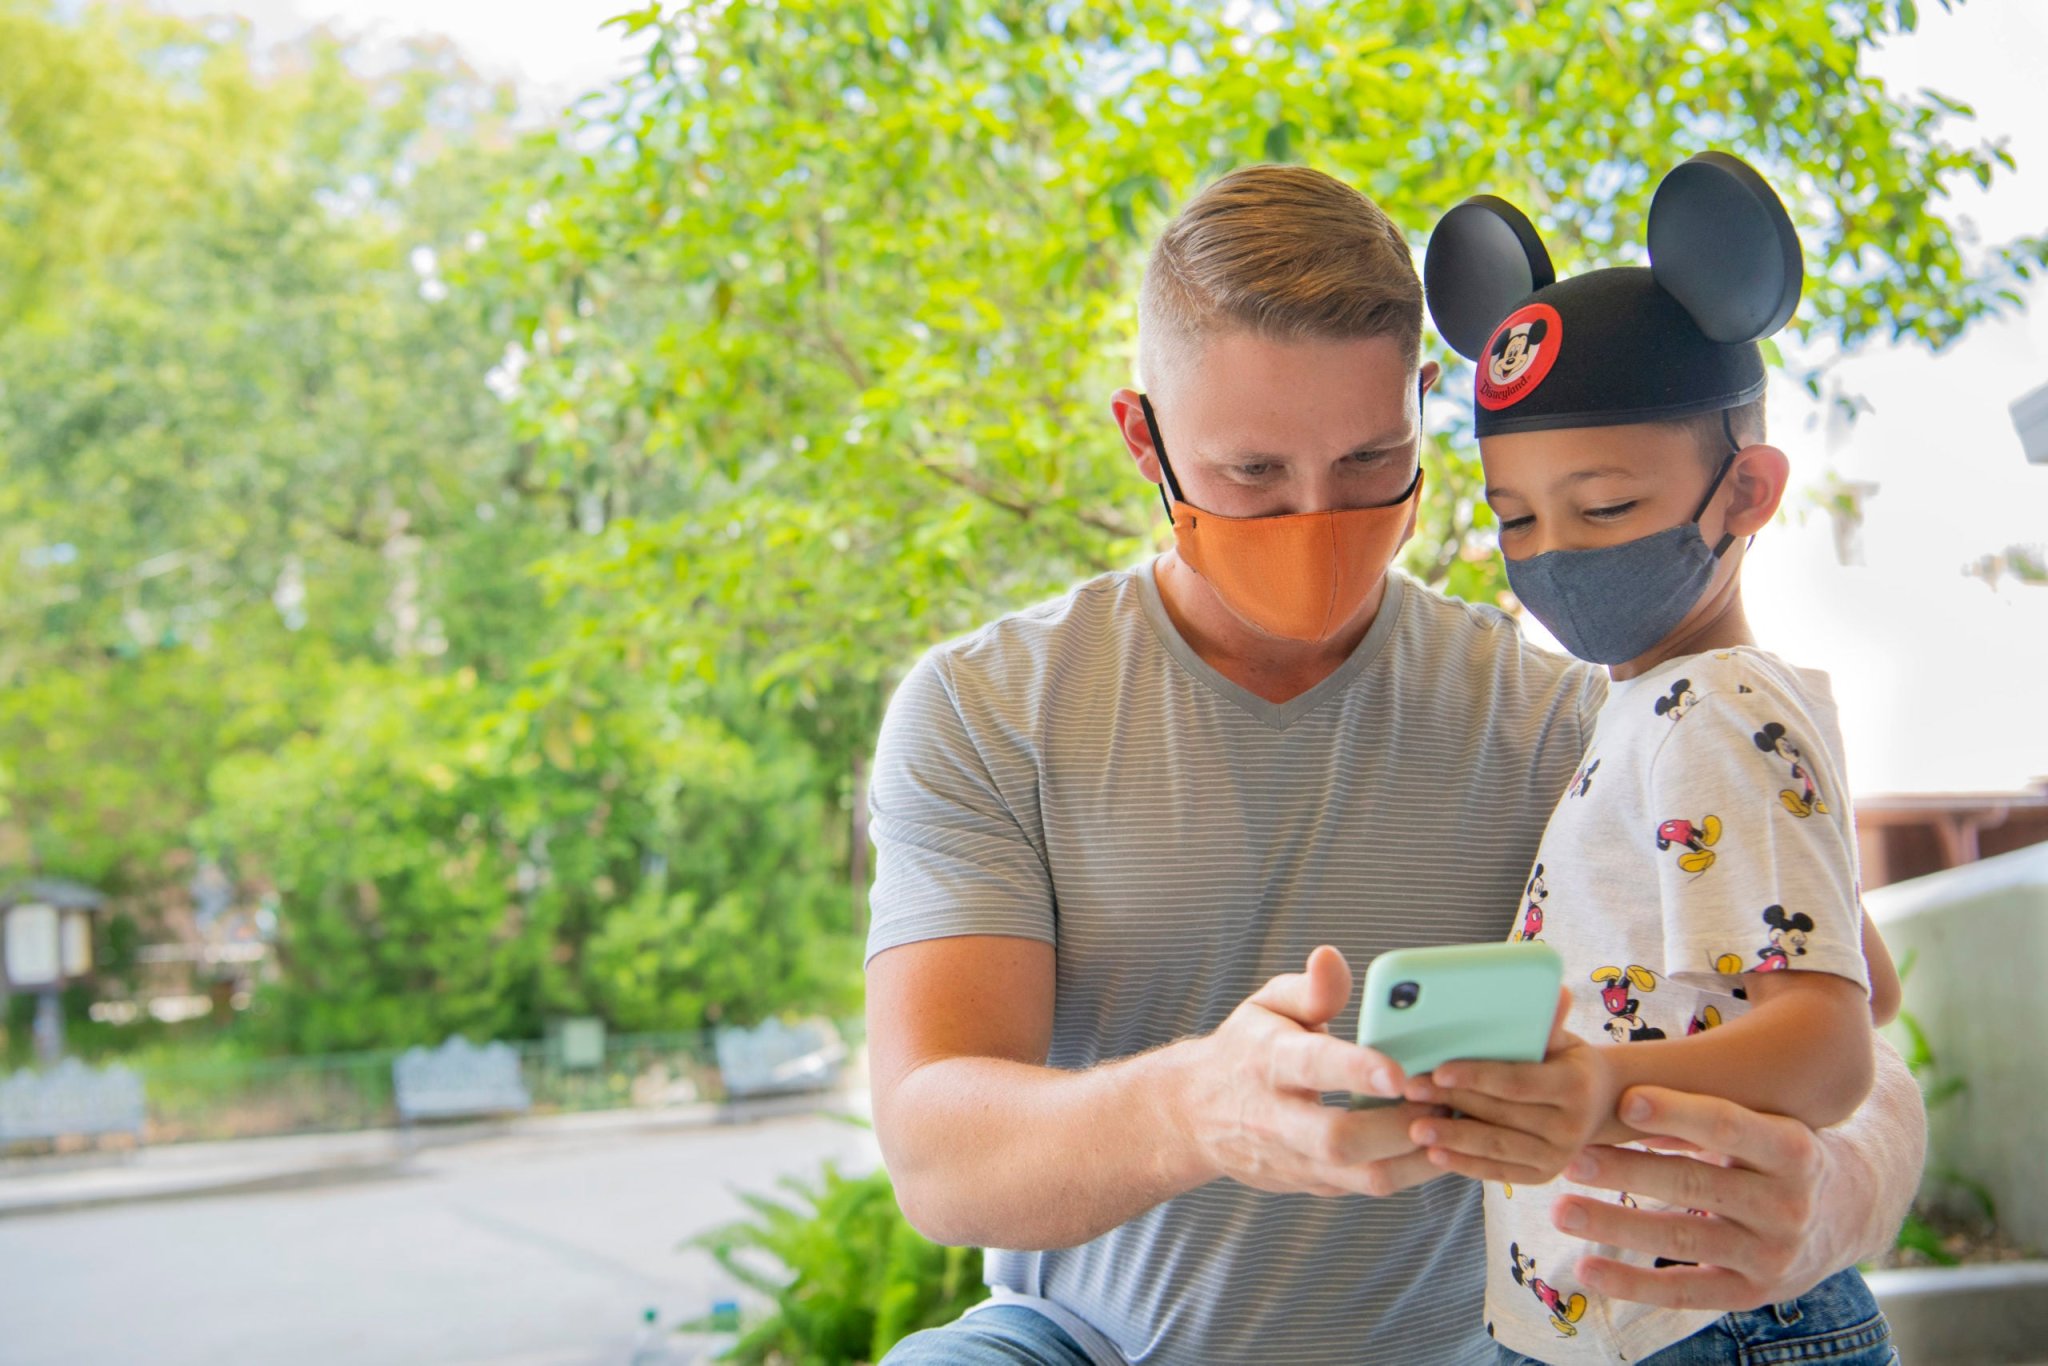 Mask on or mask off? Your guide to the latest rules, by theme park